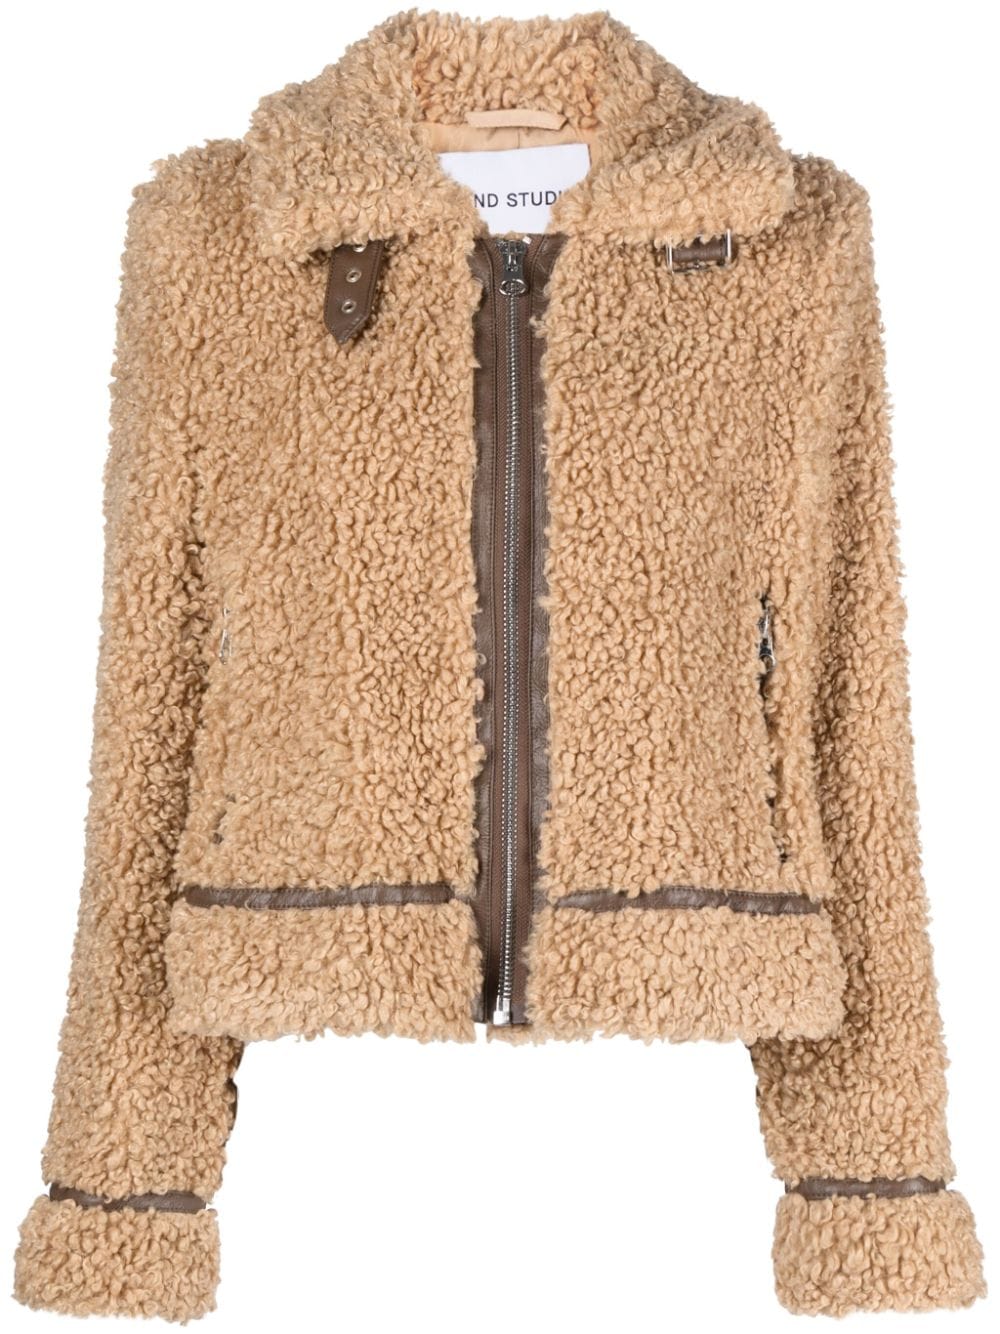 STAND STUDIO ZIP-UP FAUX-SHEARLING JACKET